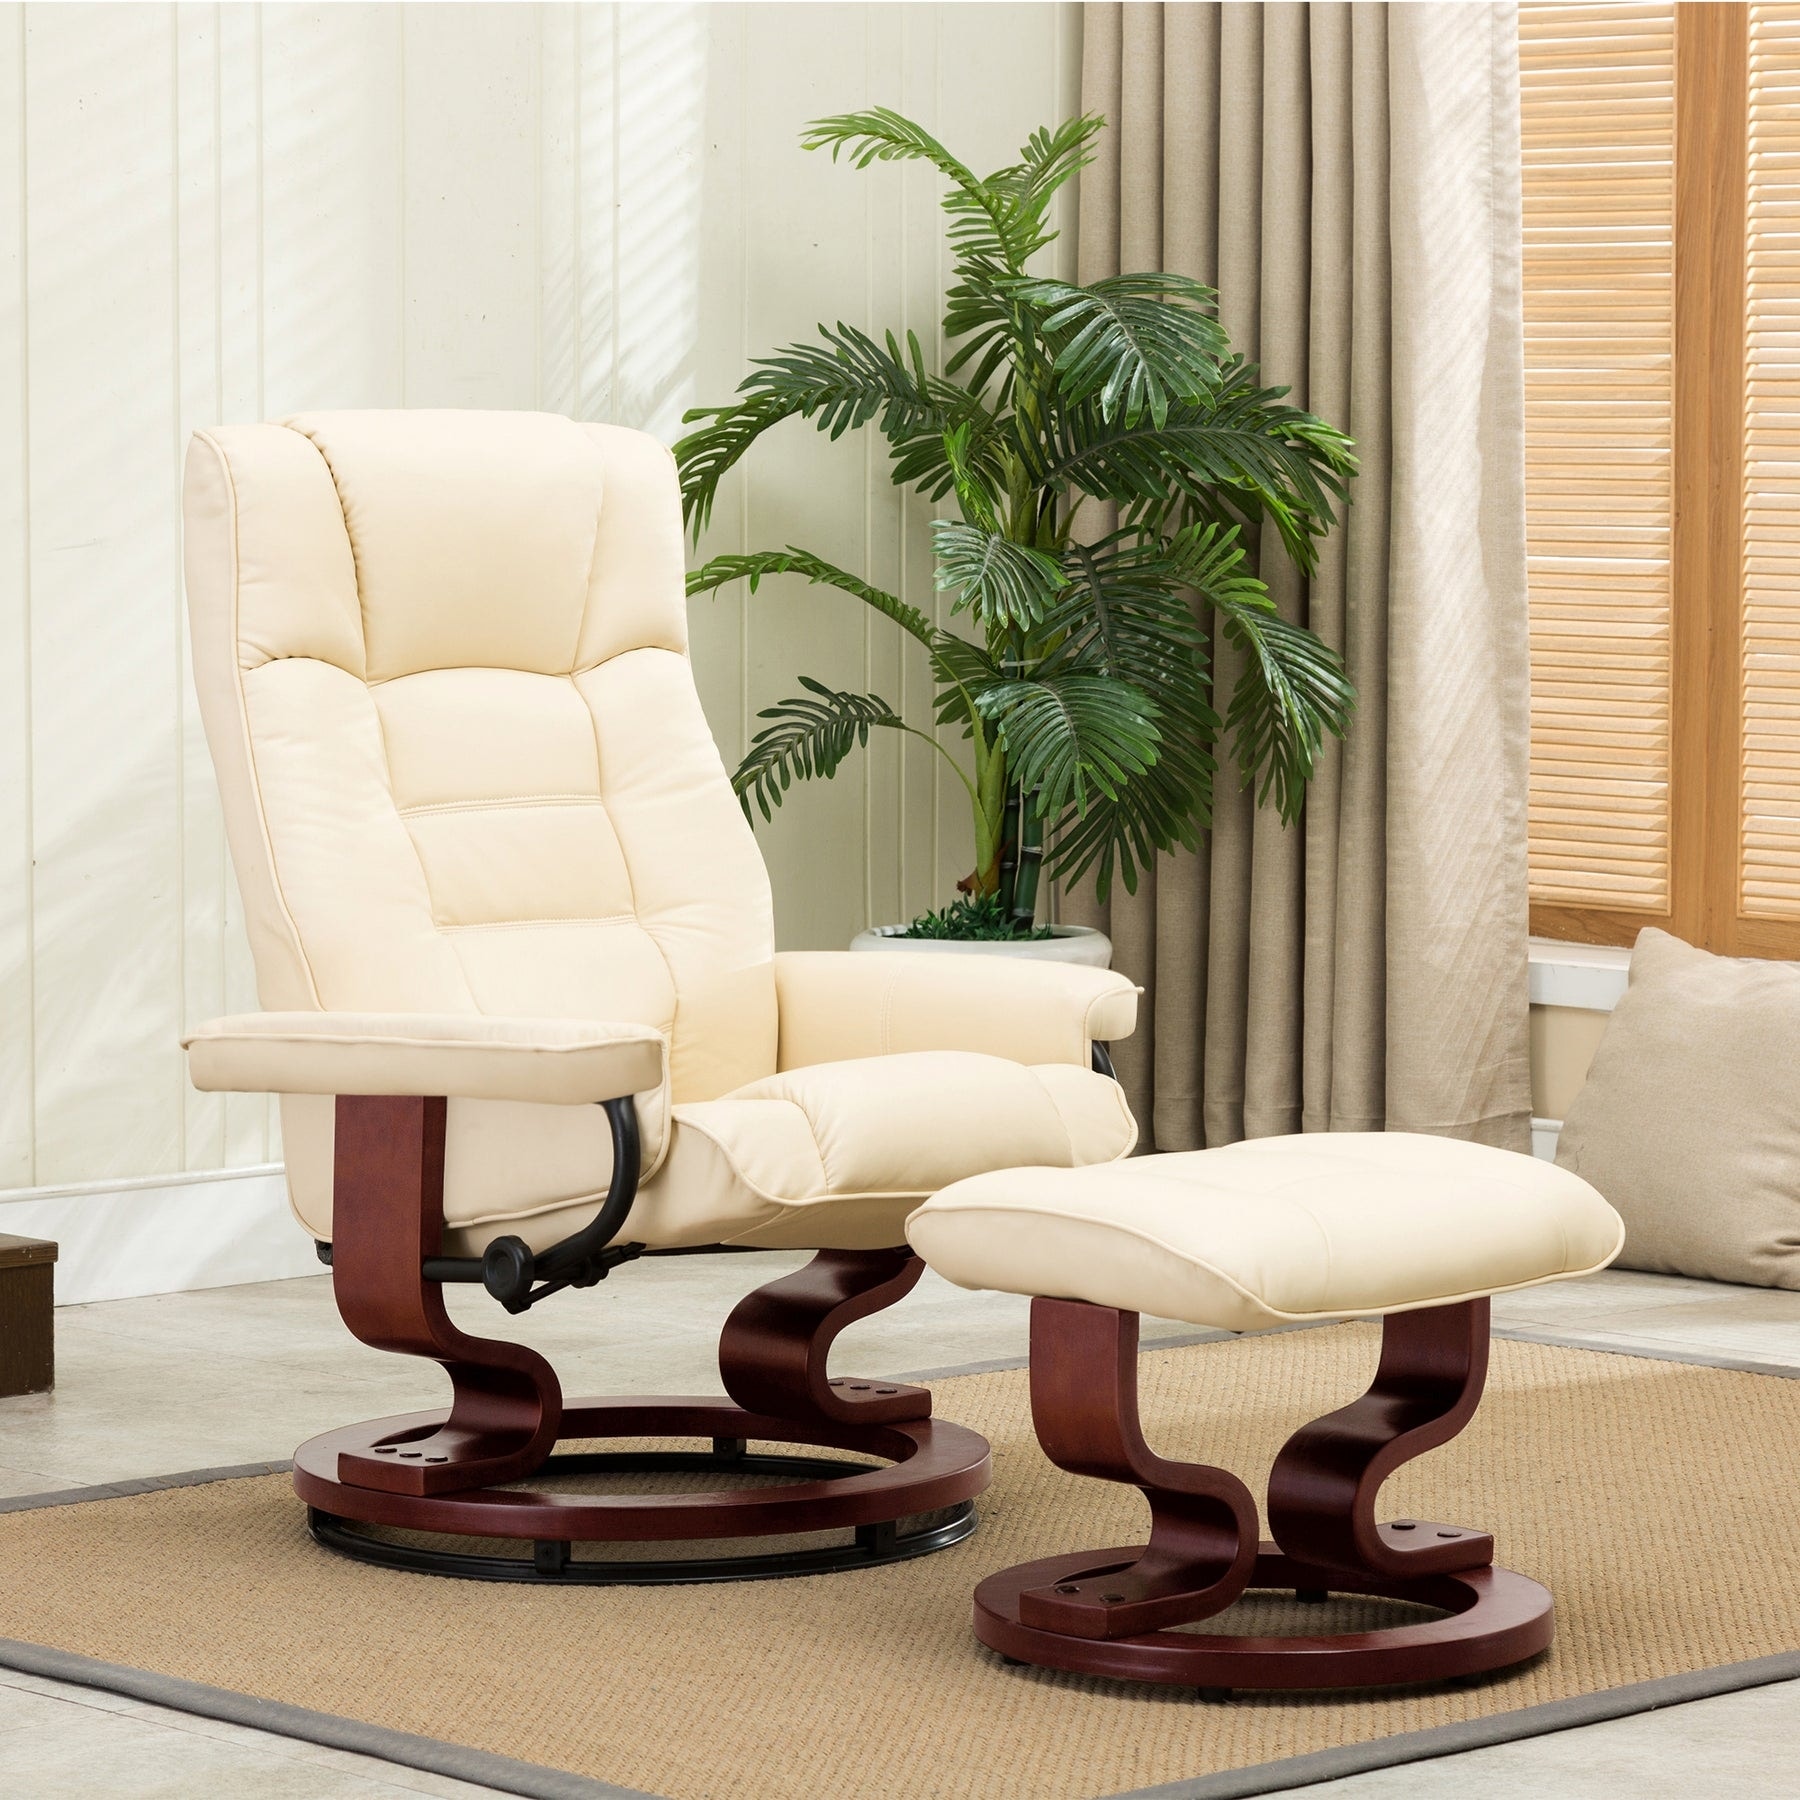 https://ak1.ostkcdn.com/images/products/is/images/direct/86e4a31d131815ee4d1552c8da3c3d7288f64d10/Mcombo-Swiveling-Recliner-Chair-with-Wood-Base-and-Ottoman.jpg